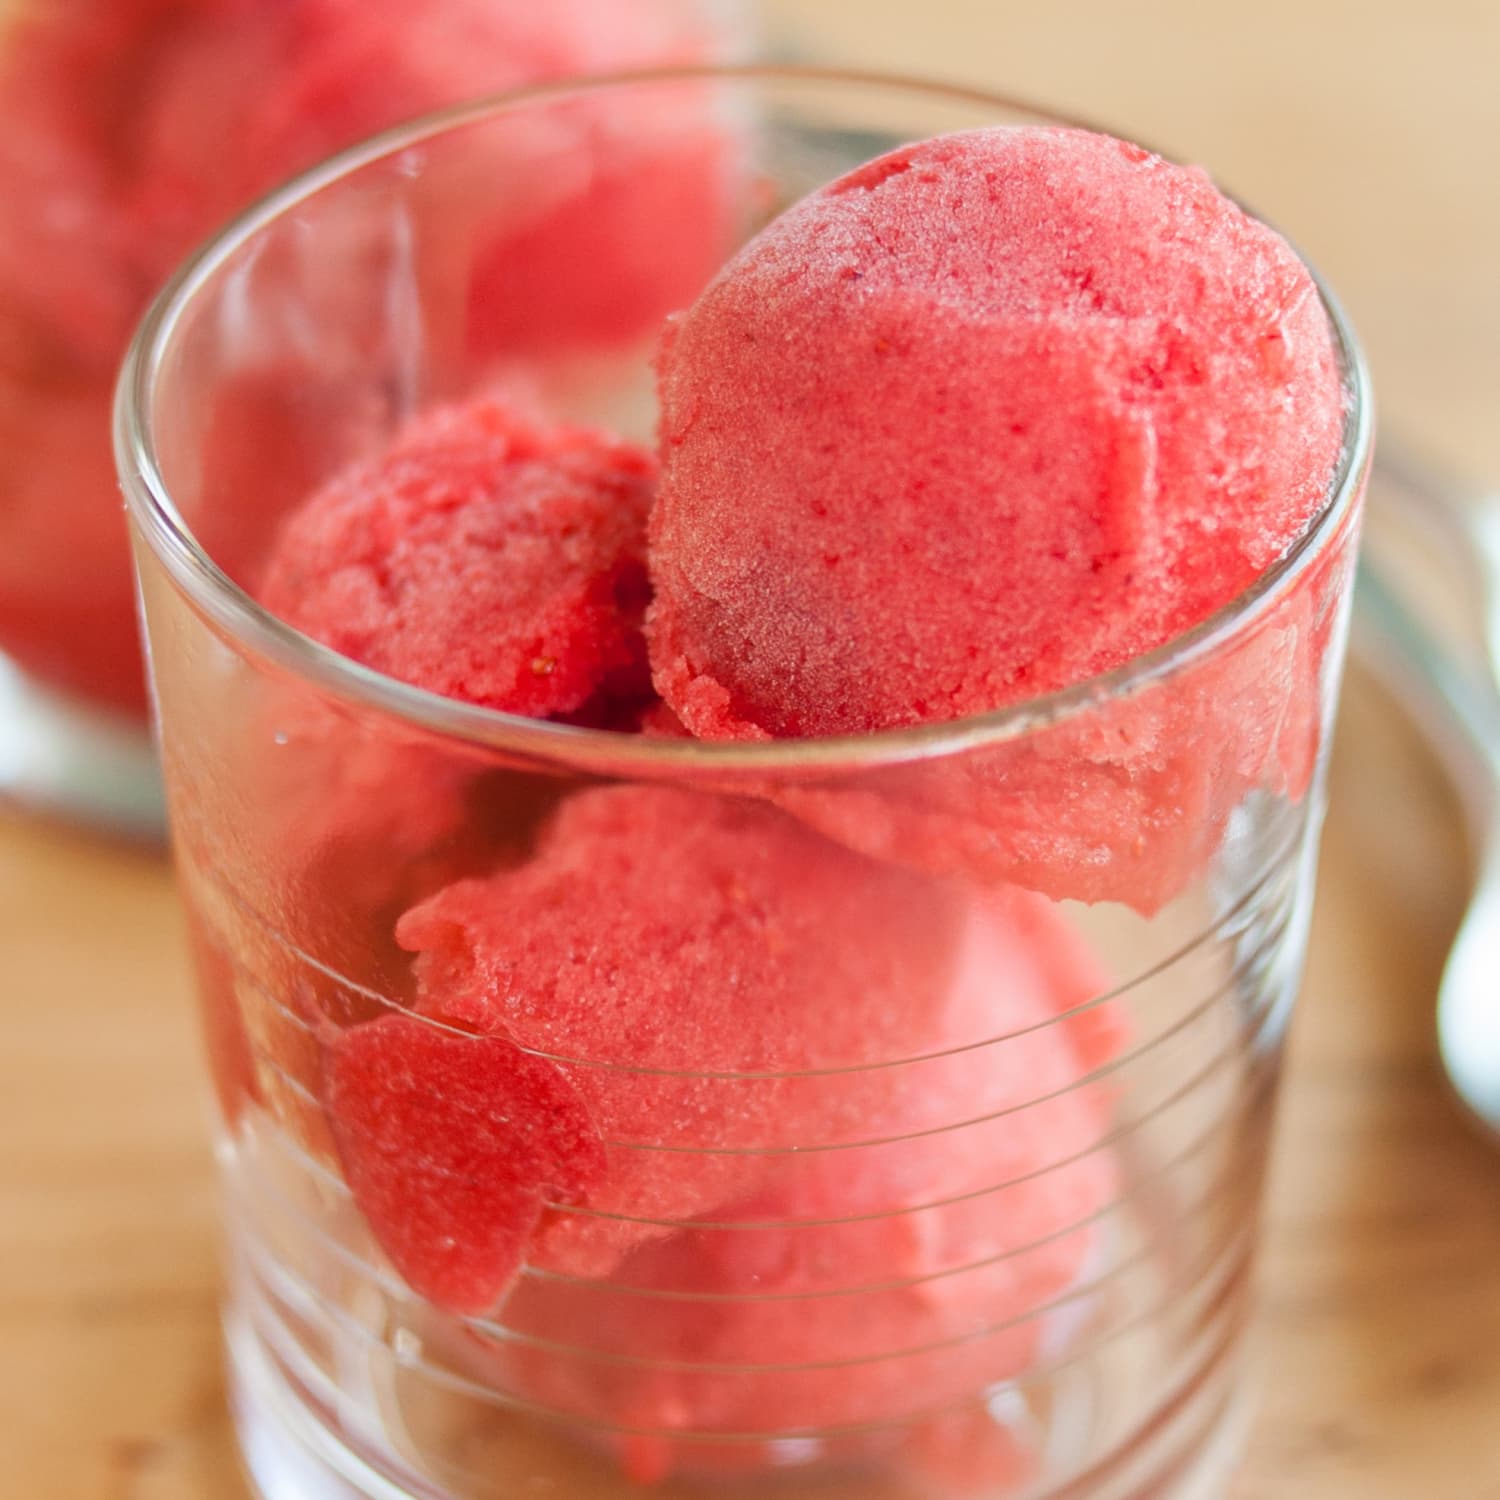 How To Make Sorbet With Any Fruit Kitchn,Coin Dealers Near Me